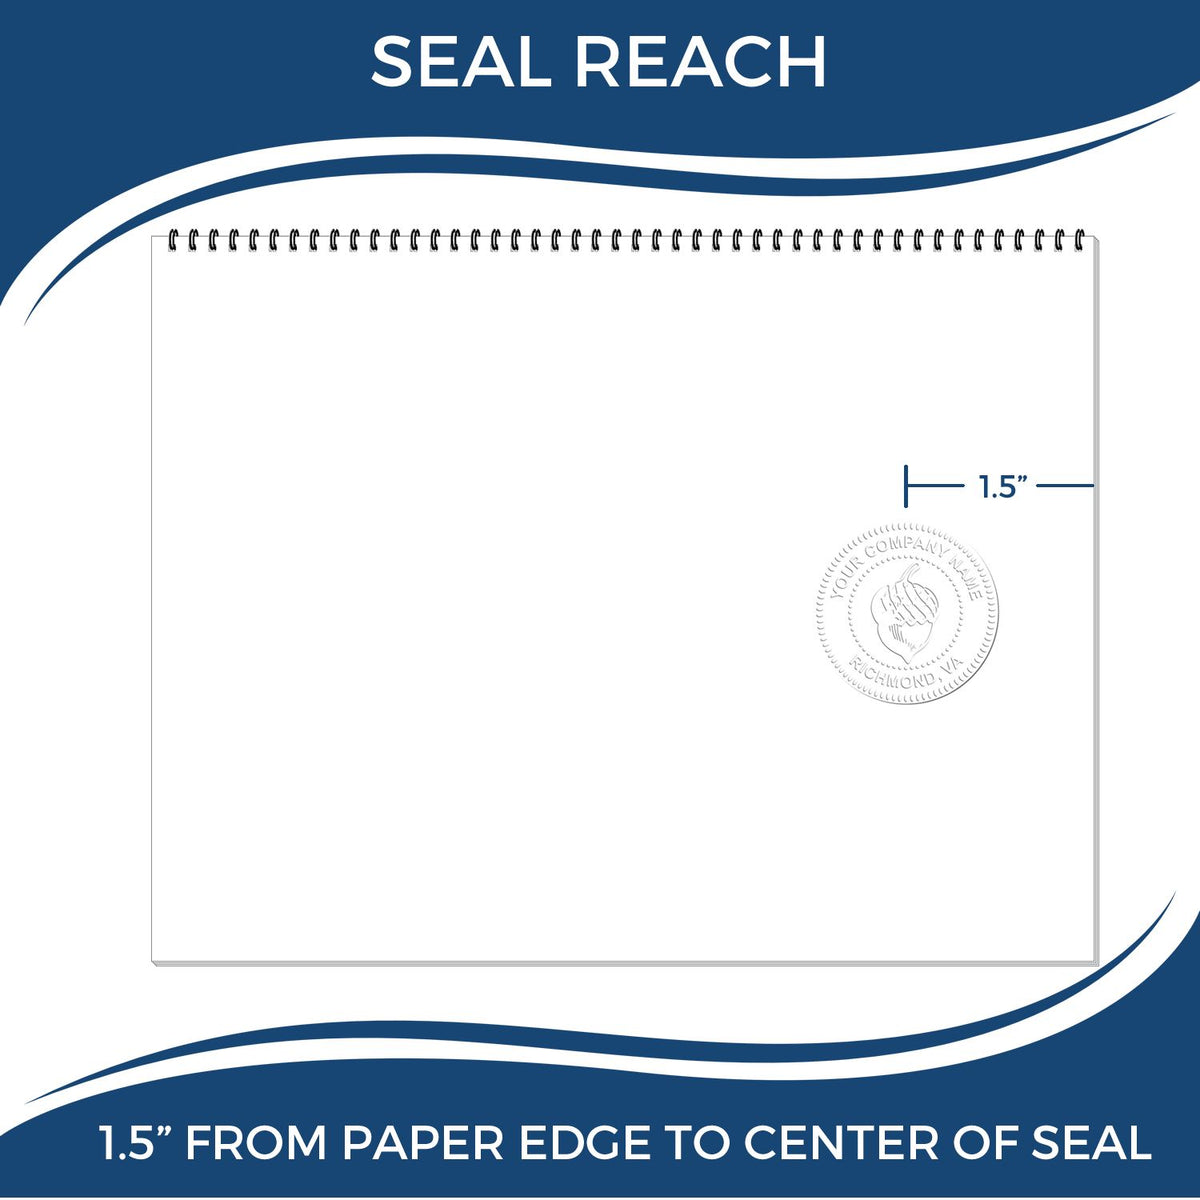 An infographic showing the seal reach which is represented by a ruler and a miniature seal image of the Gift South Dakota Engineer Seal